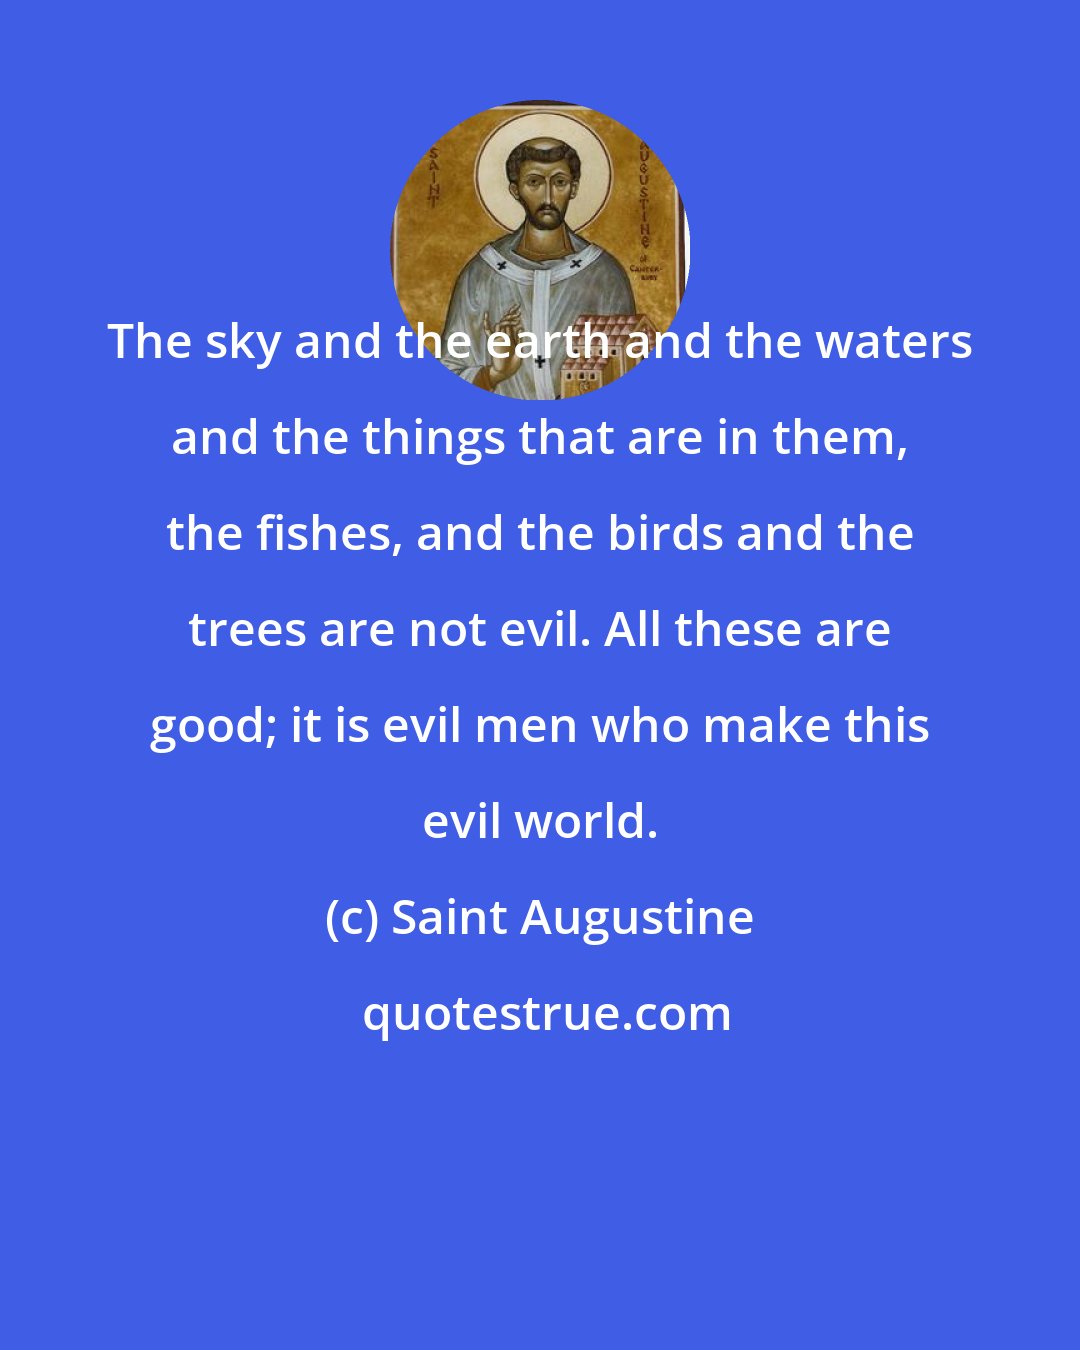 Saint Augustine: The sky and the earth and the waters and the things that are in them, the fishes, and the birds and the trees are not evil. All these are good; it is evil men who make this evil world.